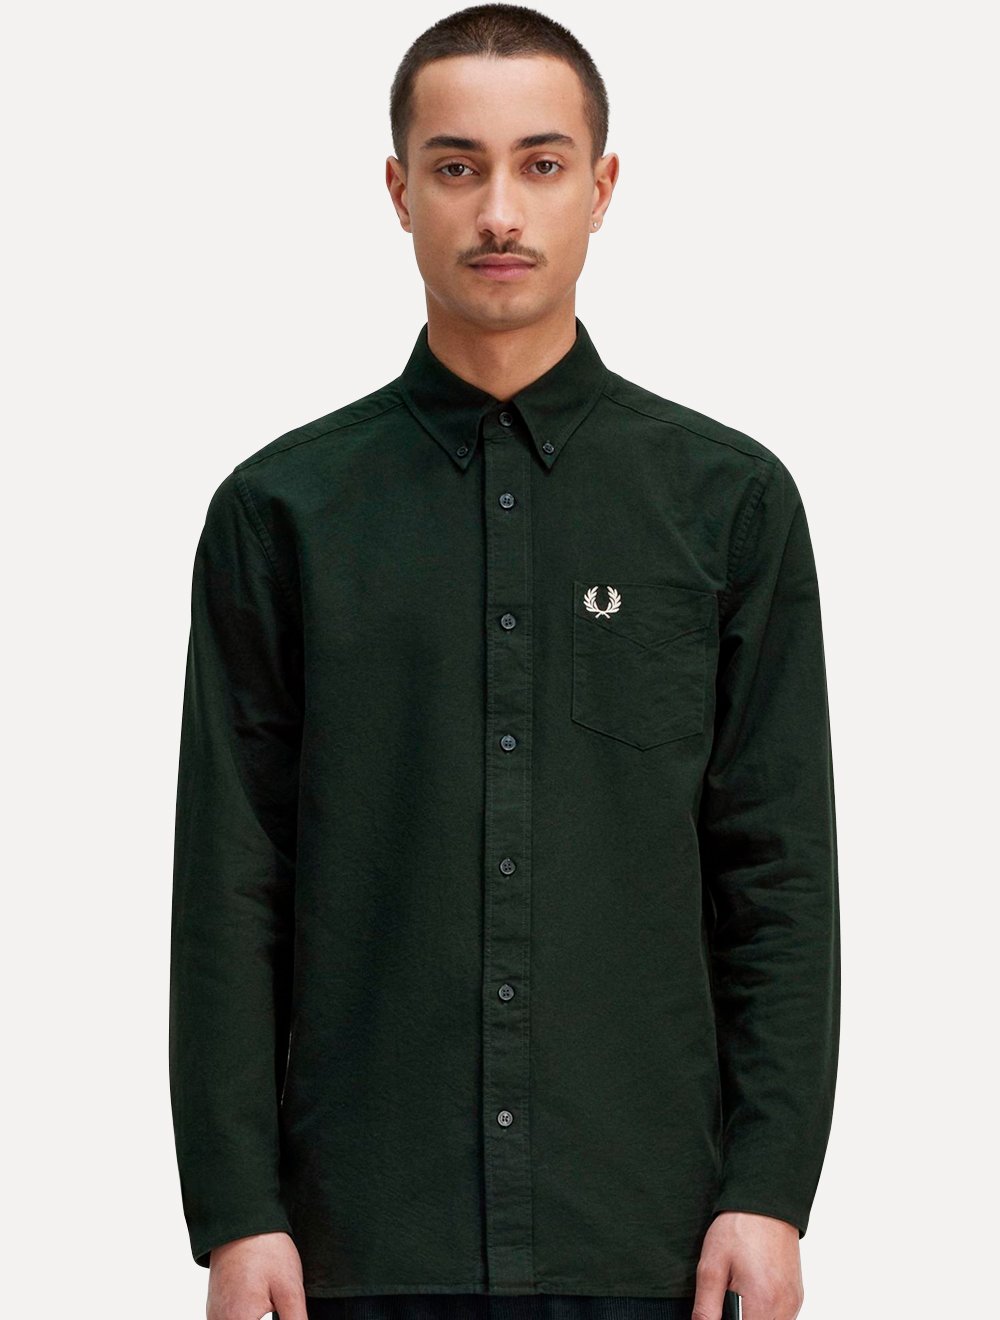 Camisa Fred Perry Masculina Oxford Pocket Light Logo Verde Escuro